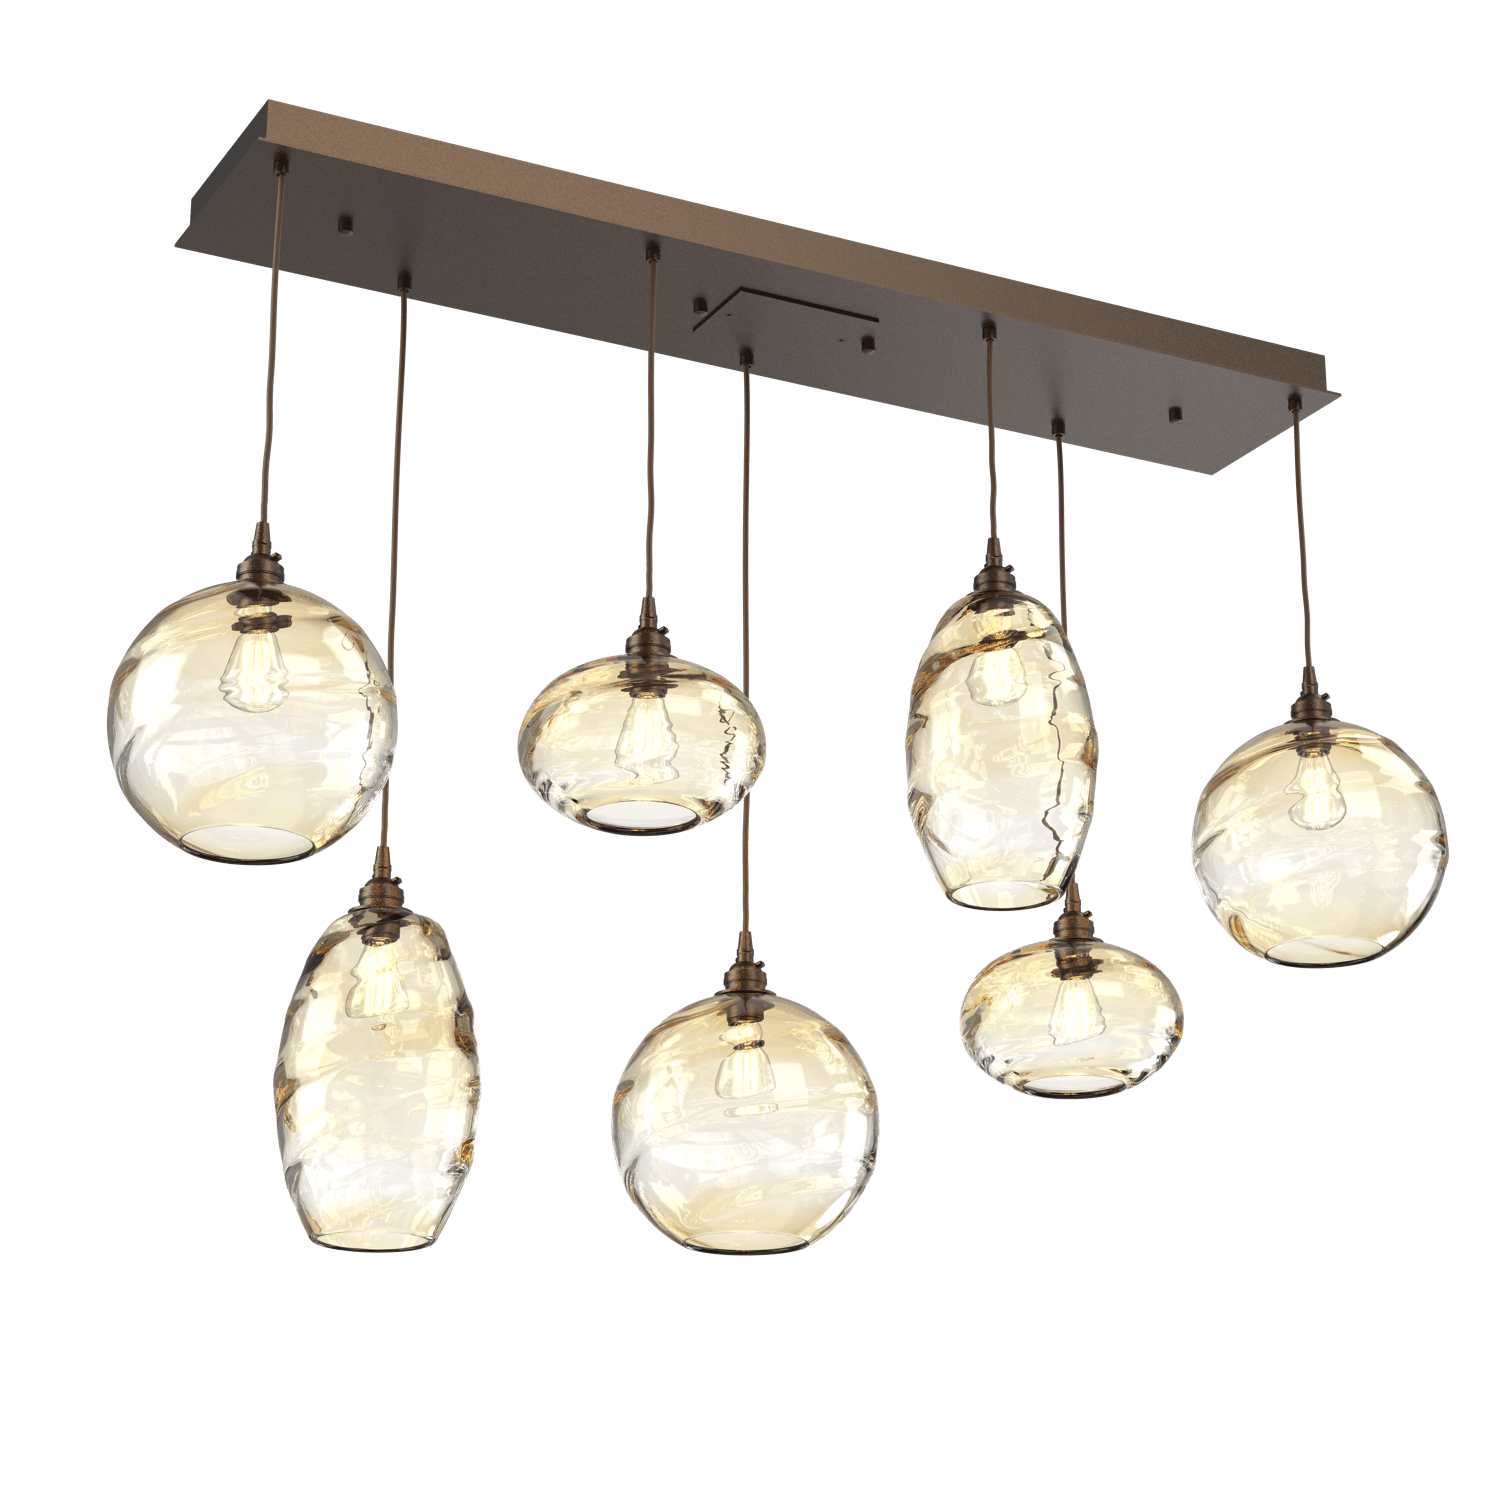 PLB0048-07-FB-OA-Hammerton-Studio-Optic-Blown-Glass-Misto-7-light-linear-pendant-chandelier-with-flat-bronze-finish-and-optic-amber-blown-glass-shades-and-incandescent-lamping